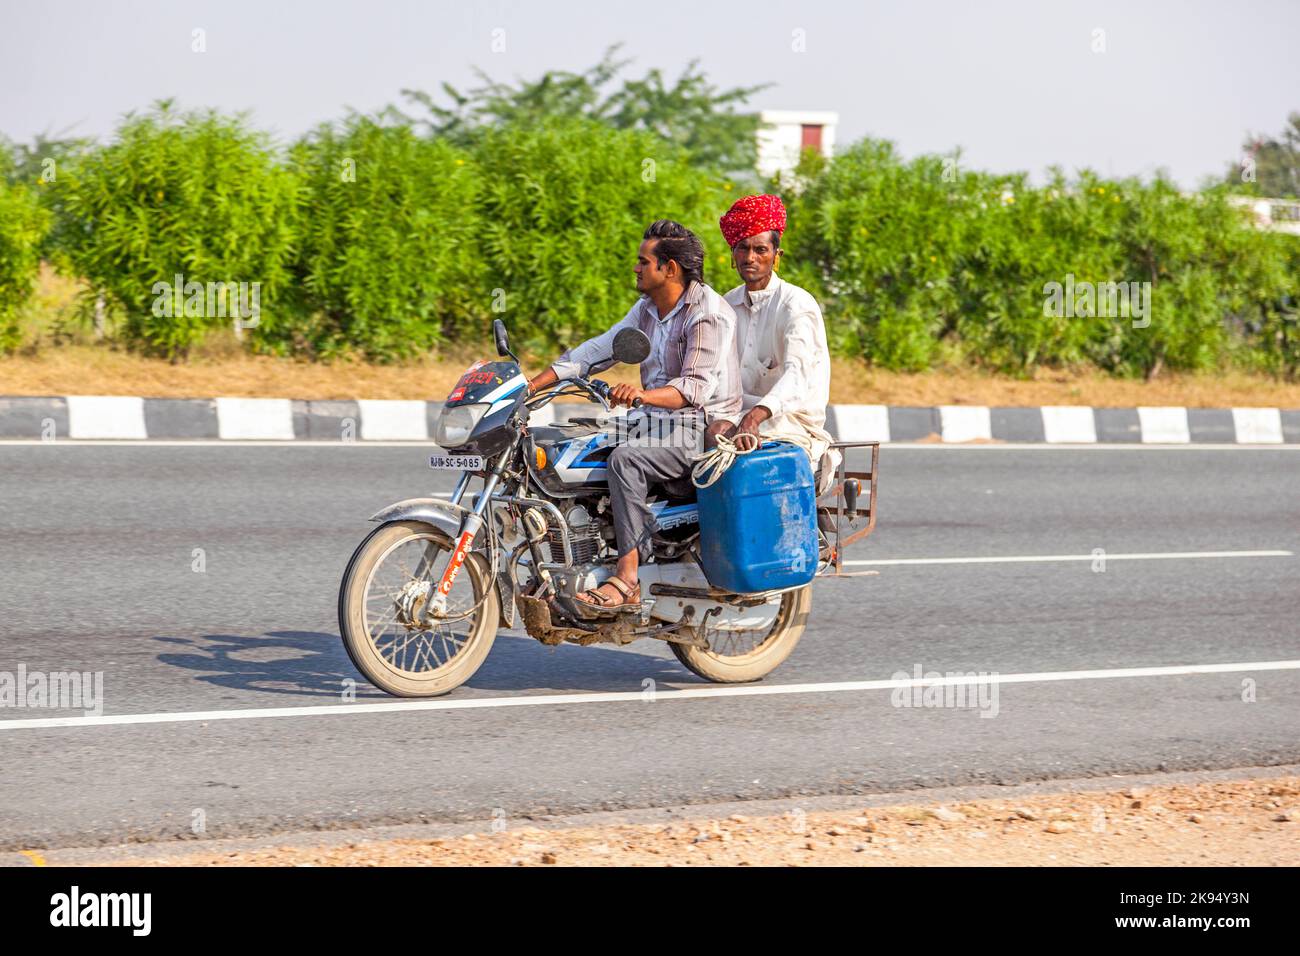 RAJASTHAN - INDIA - OCTOBER 18: family ride scooter on highway on October 28, 2012 in Rajasthan, India. Up to six family members manage to ride these Stock Photo